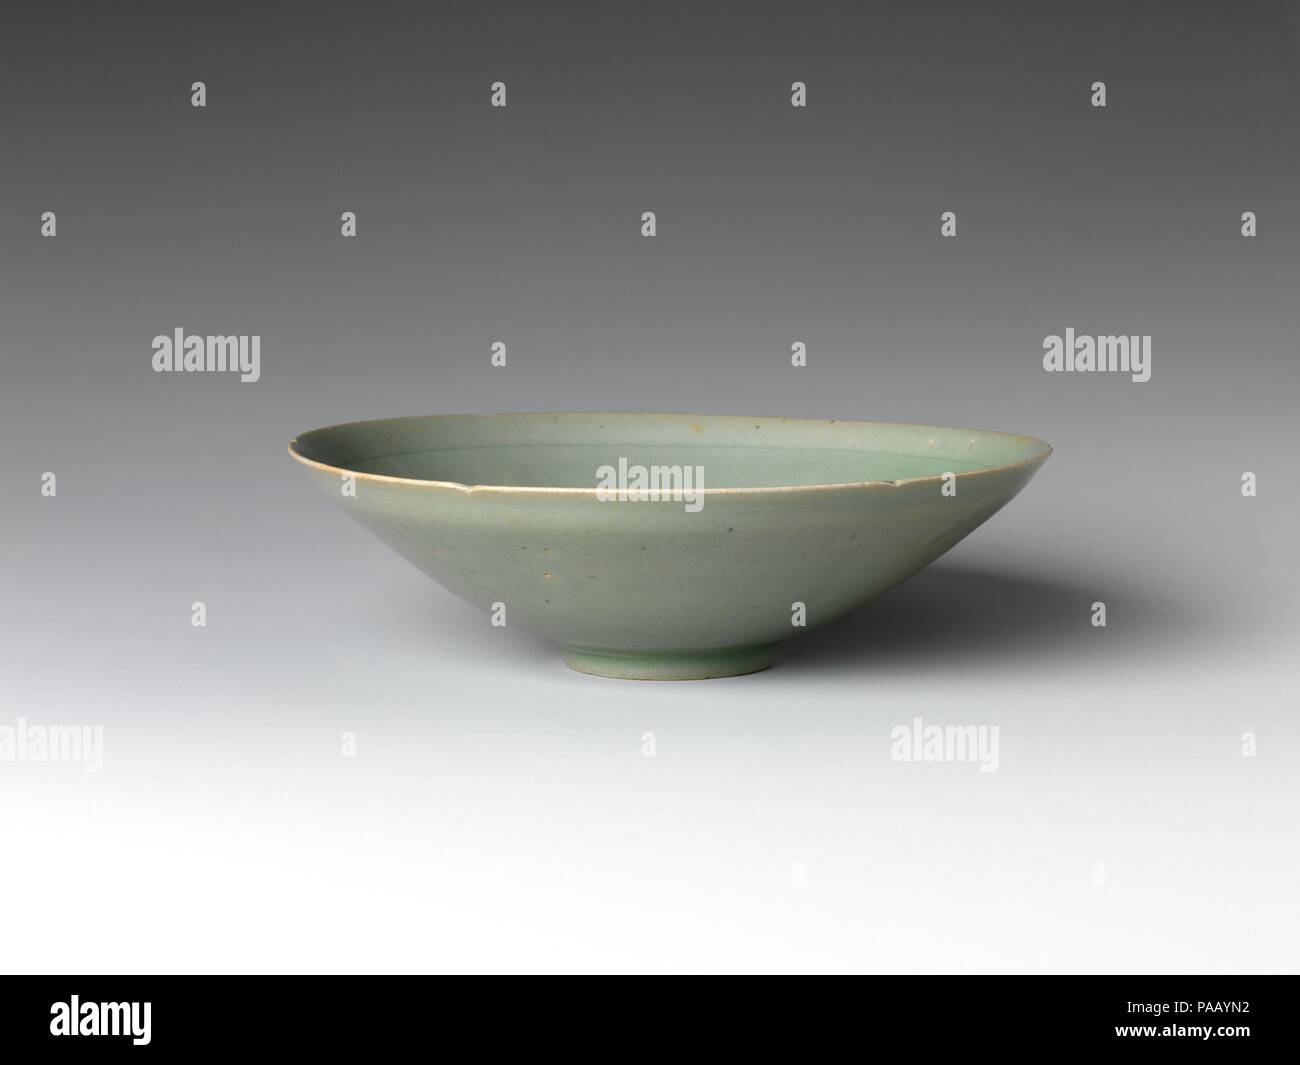 Six-Lobed Bowl. Culture: Korea. Dimensions: H. 2 1/8 in. (5.4 cm); Diam. 7 3/8 in. (18.8 cm); Diam. of foot 2 in. (5.1 cm). Date: early 12th century.  This six-lobed bowl, shaped to look like a flower, exemplifies the elegant purity of early twelfth-century Goryeo celadon. Its clean, minimalist form is unmarked by surface decoration, save for an incised ring around the interior rim of the bowl. The thinly potted body, gray-green glaze, and three small spur marks on the base (evidence that the vessels were stacked during firing) are all characteristic of celadon from this period. Museum: Metrop Stock Photo